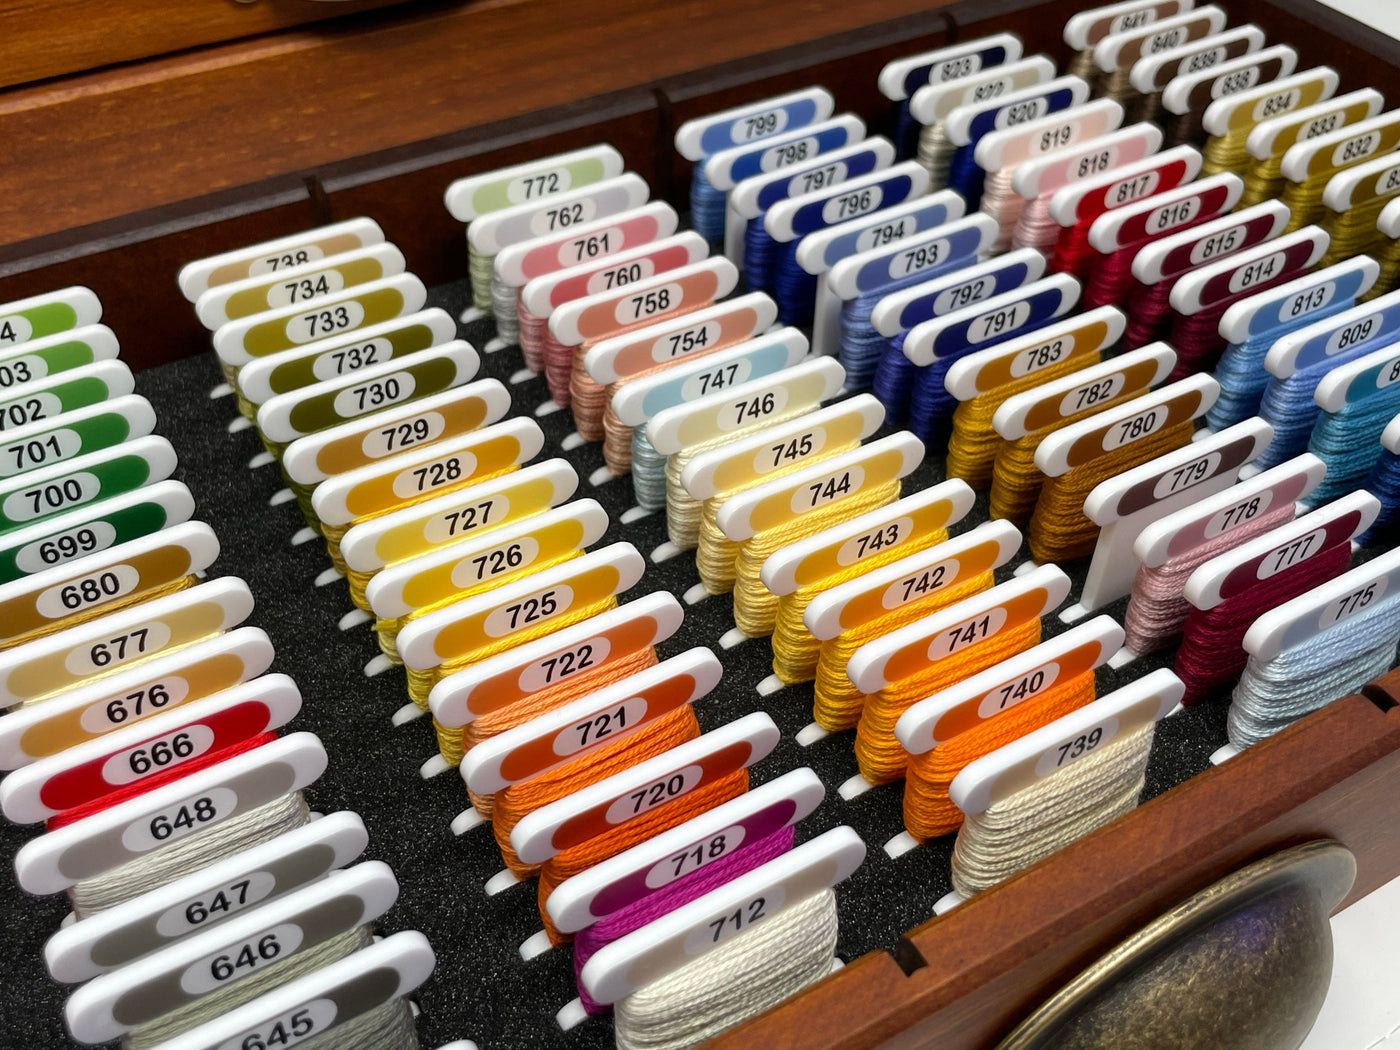 DMC 3mm acrylic bobbins with printed number and colours - sized for DMC wooden vintage cabinet